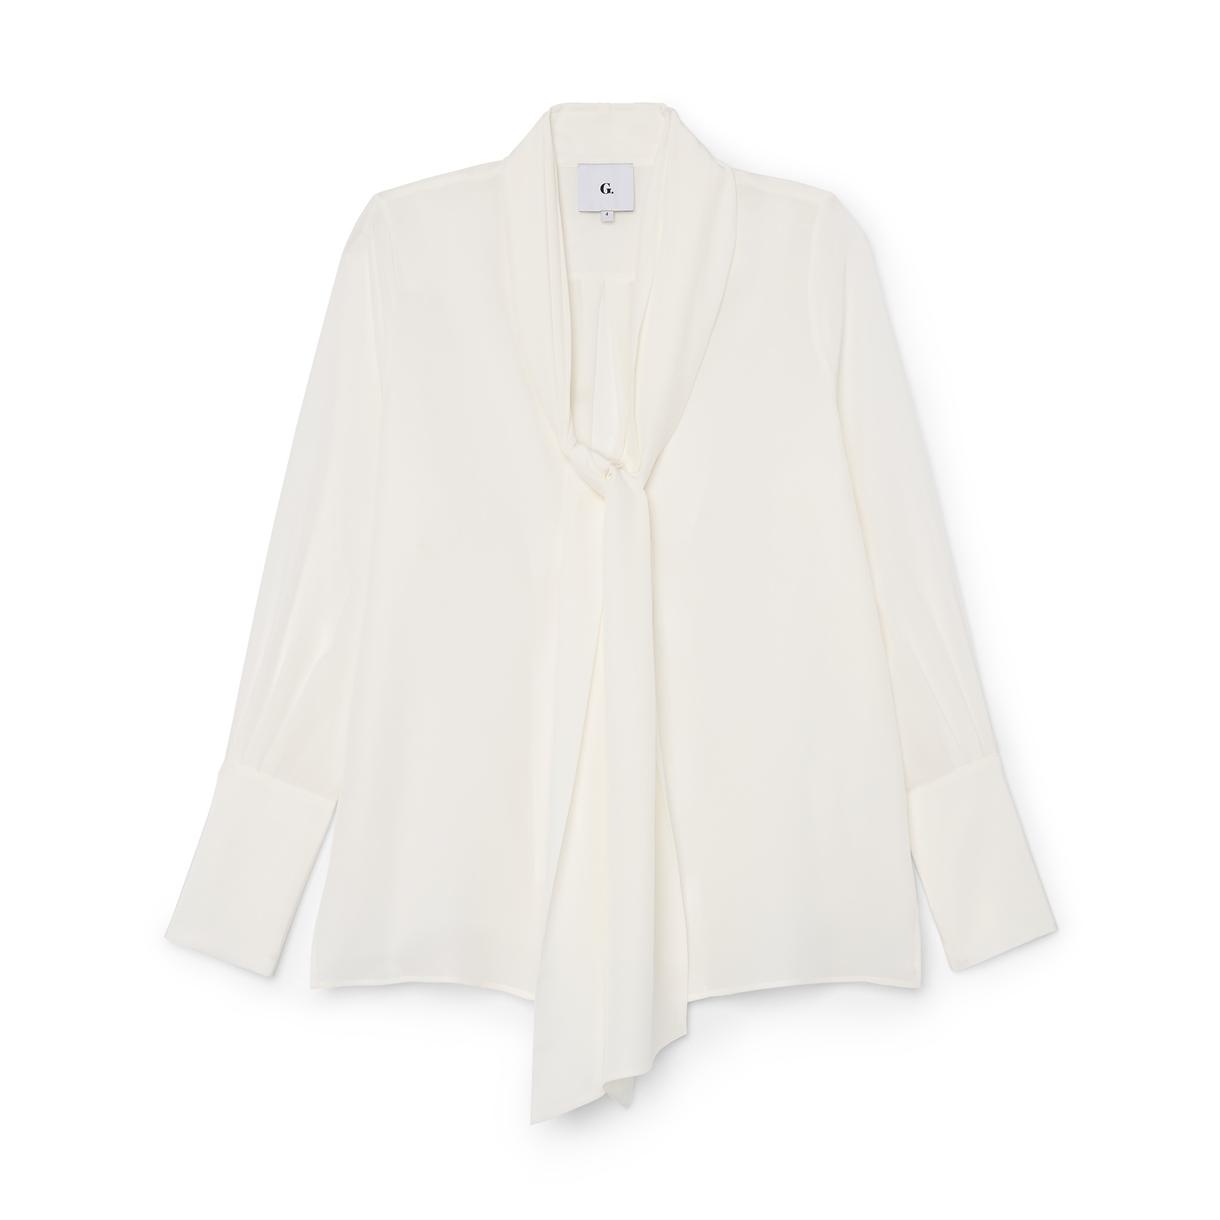 G. Label by goop Ginny Long-Tie Blouse